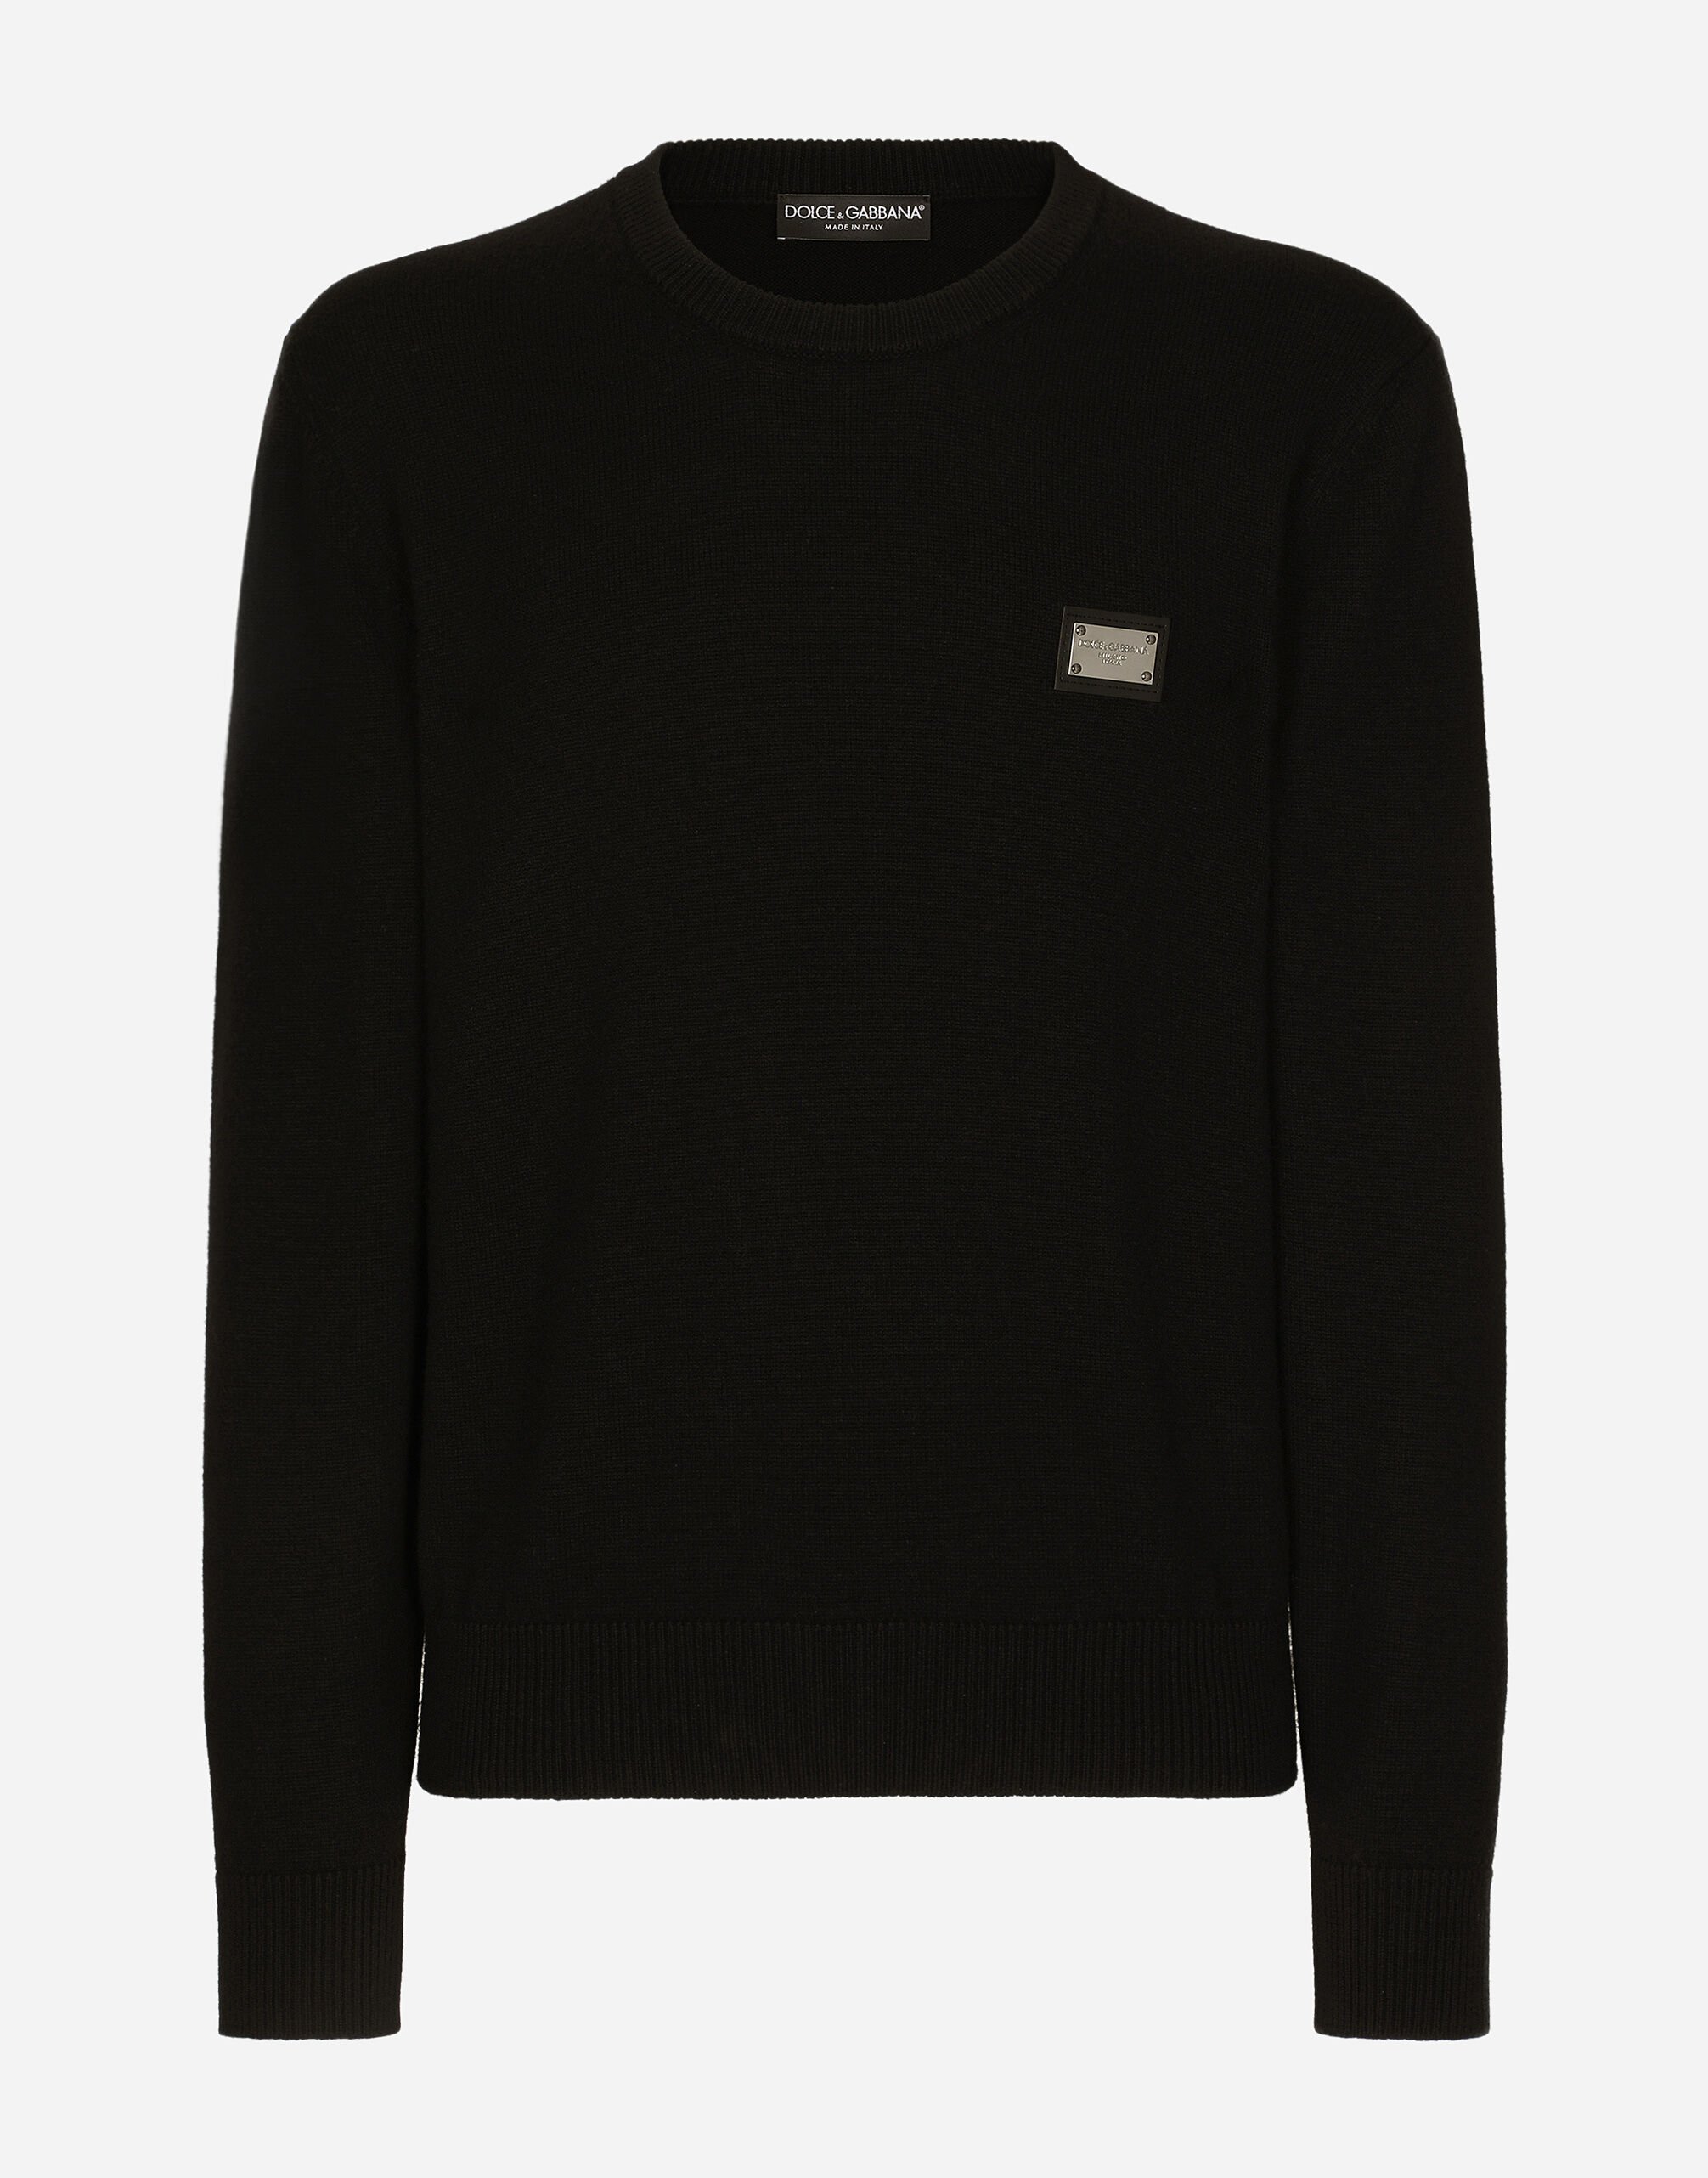 Wool round-neck sweater with branded tag